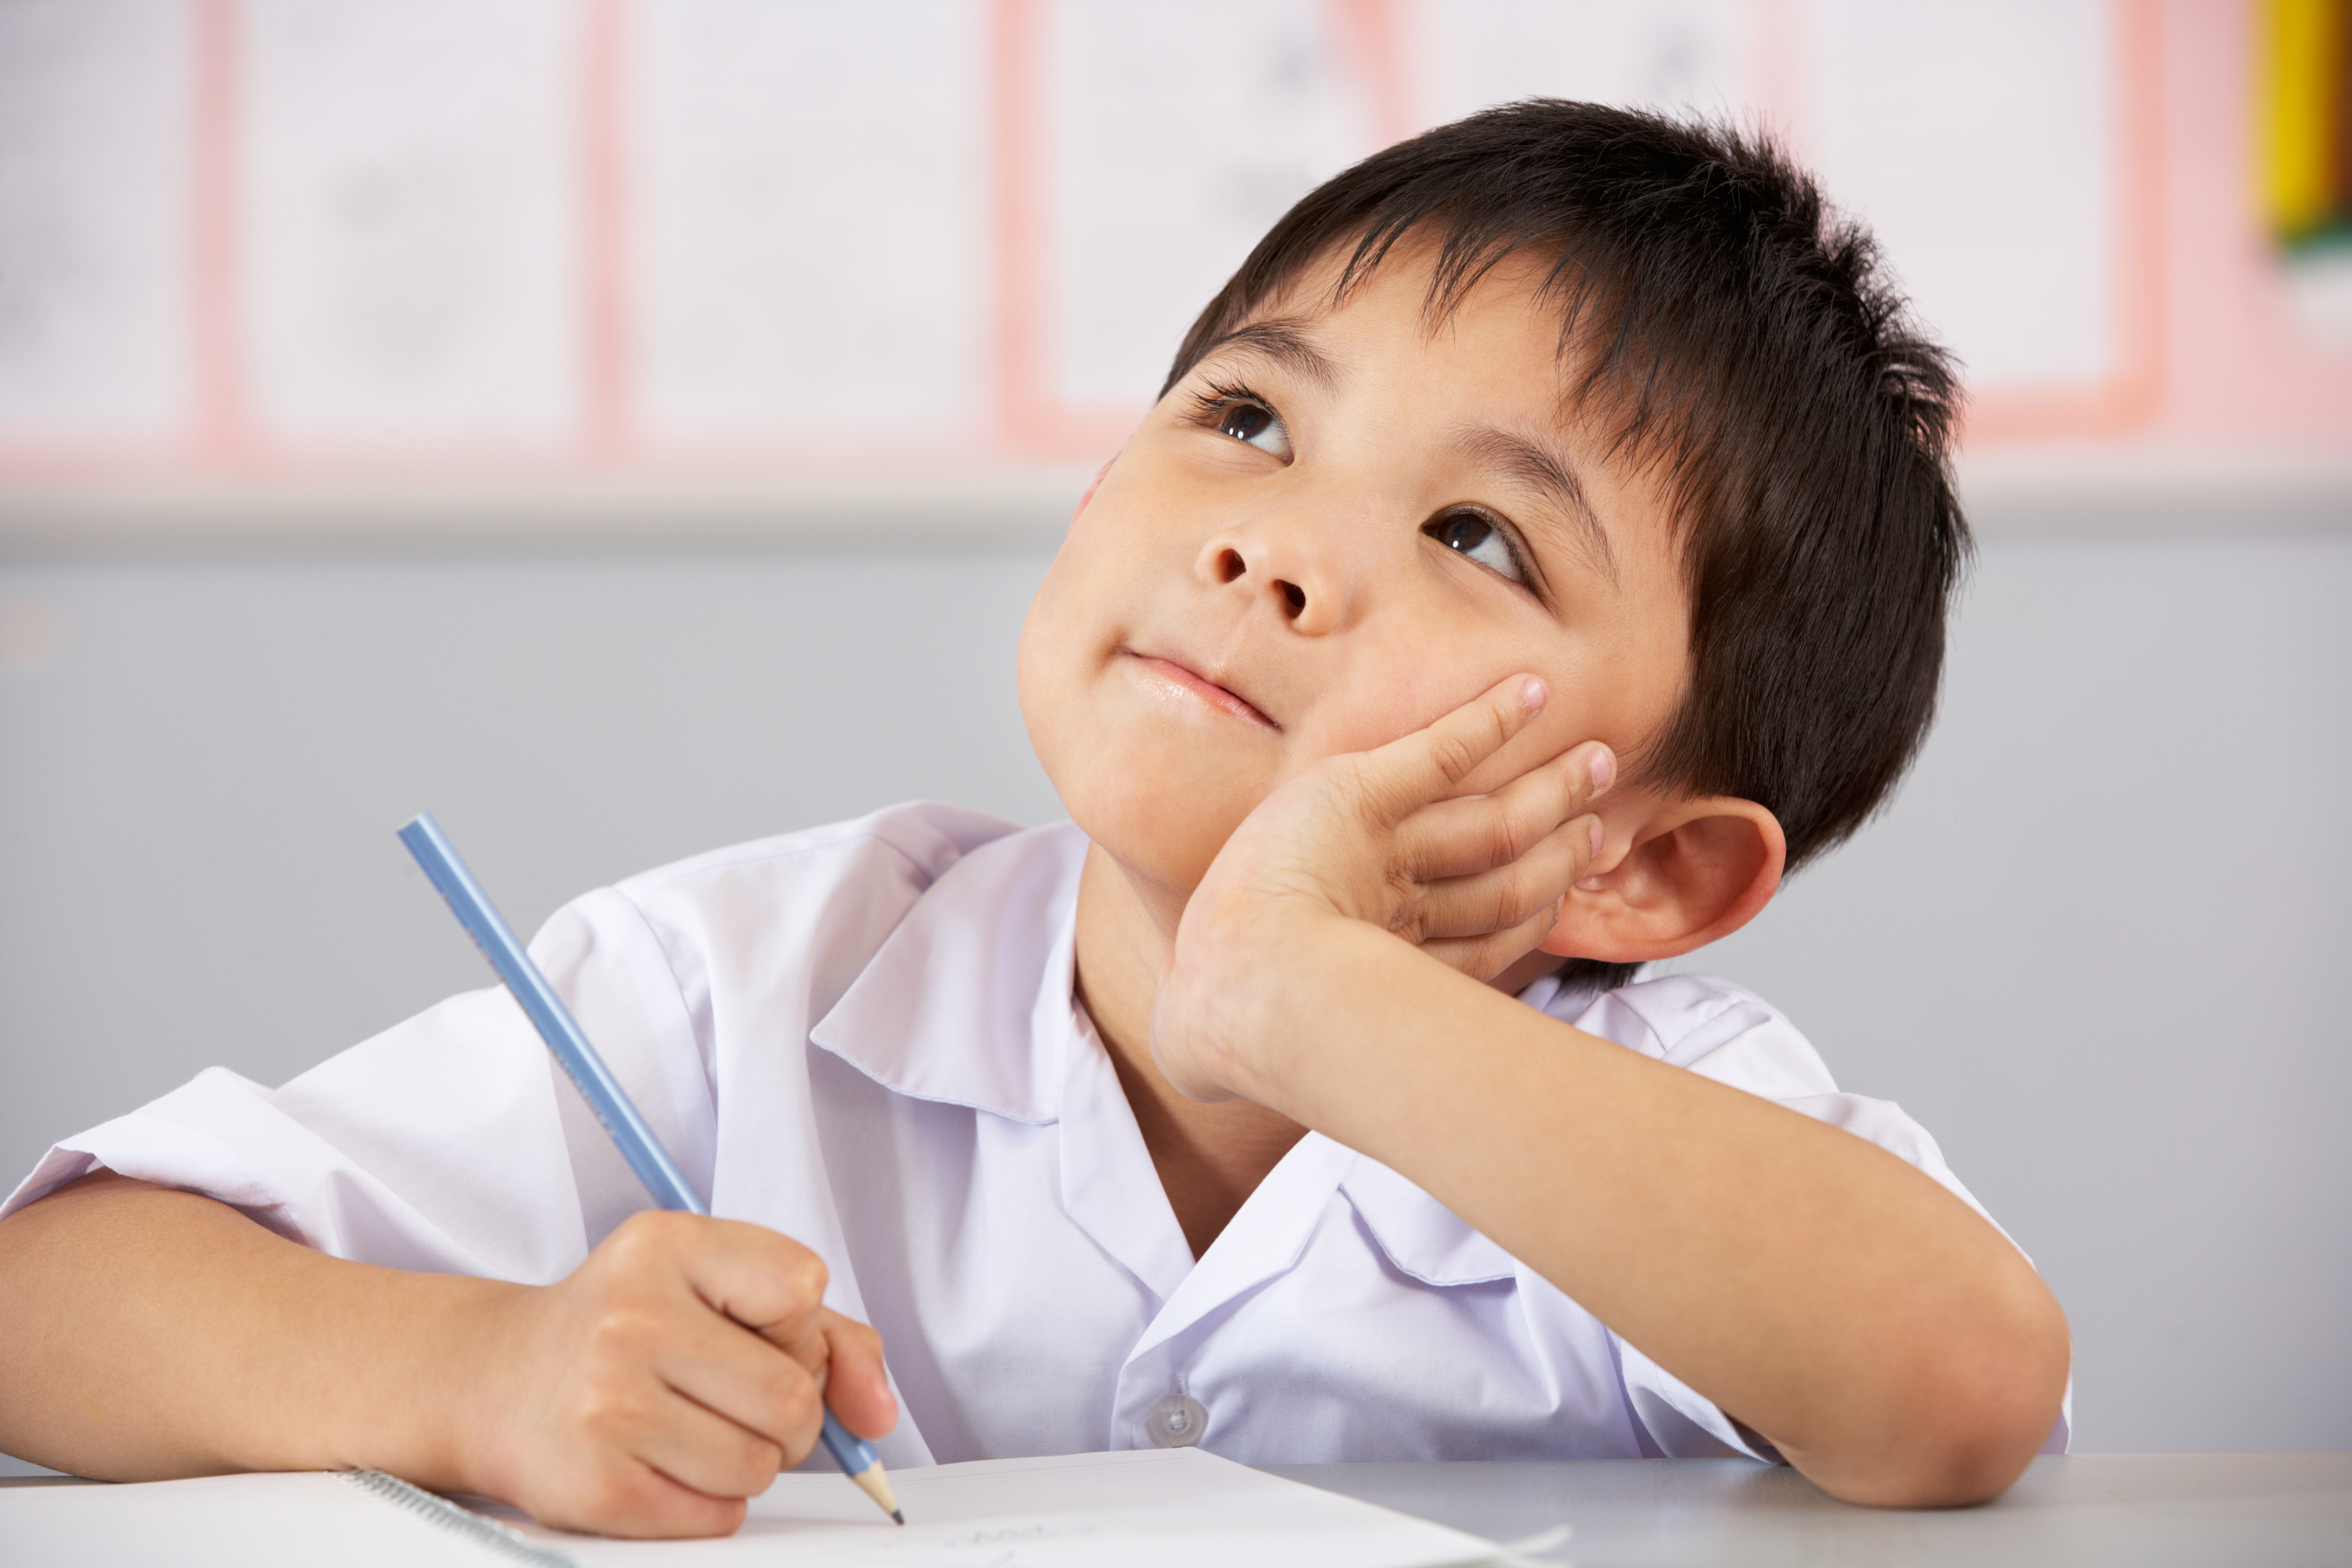 Young child sits in school at table with pencil in hand